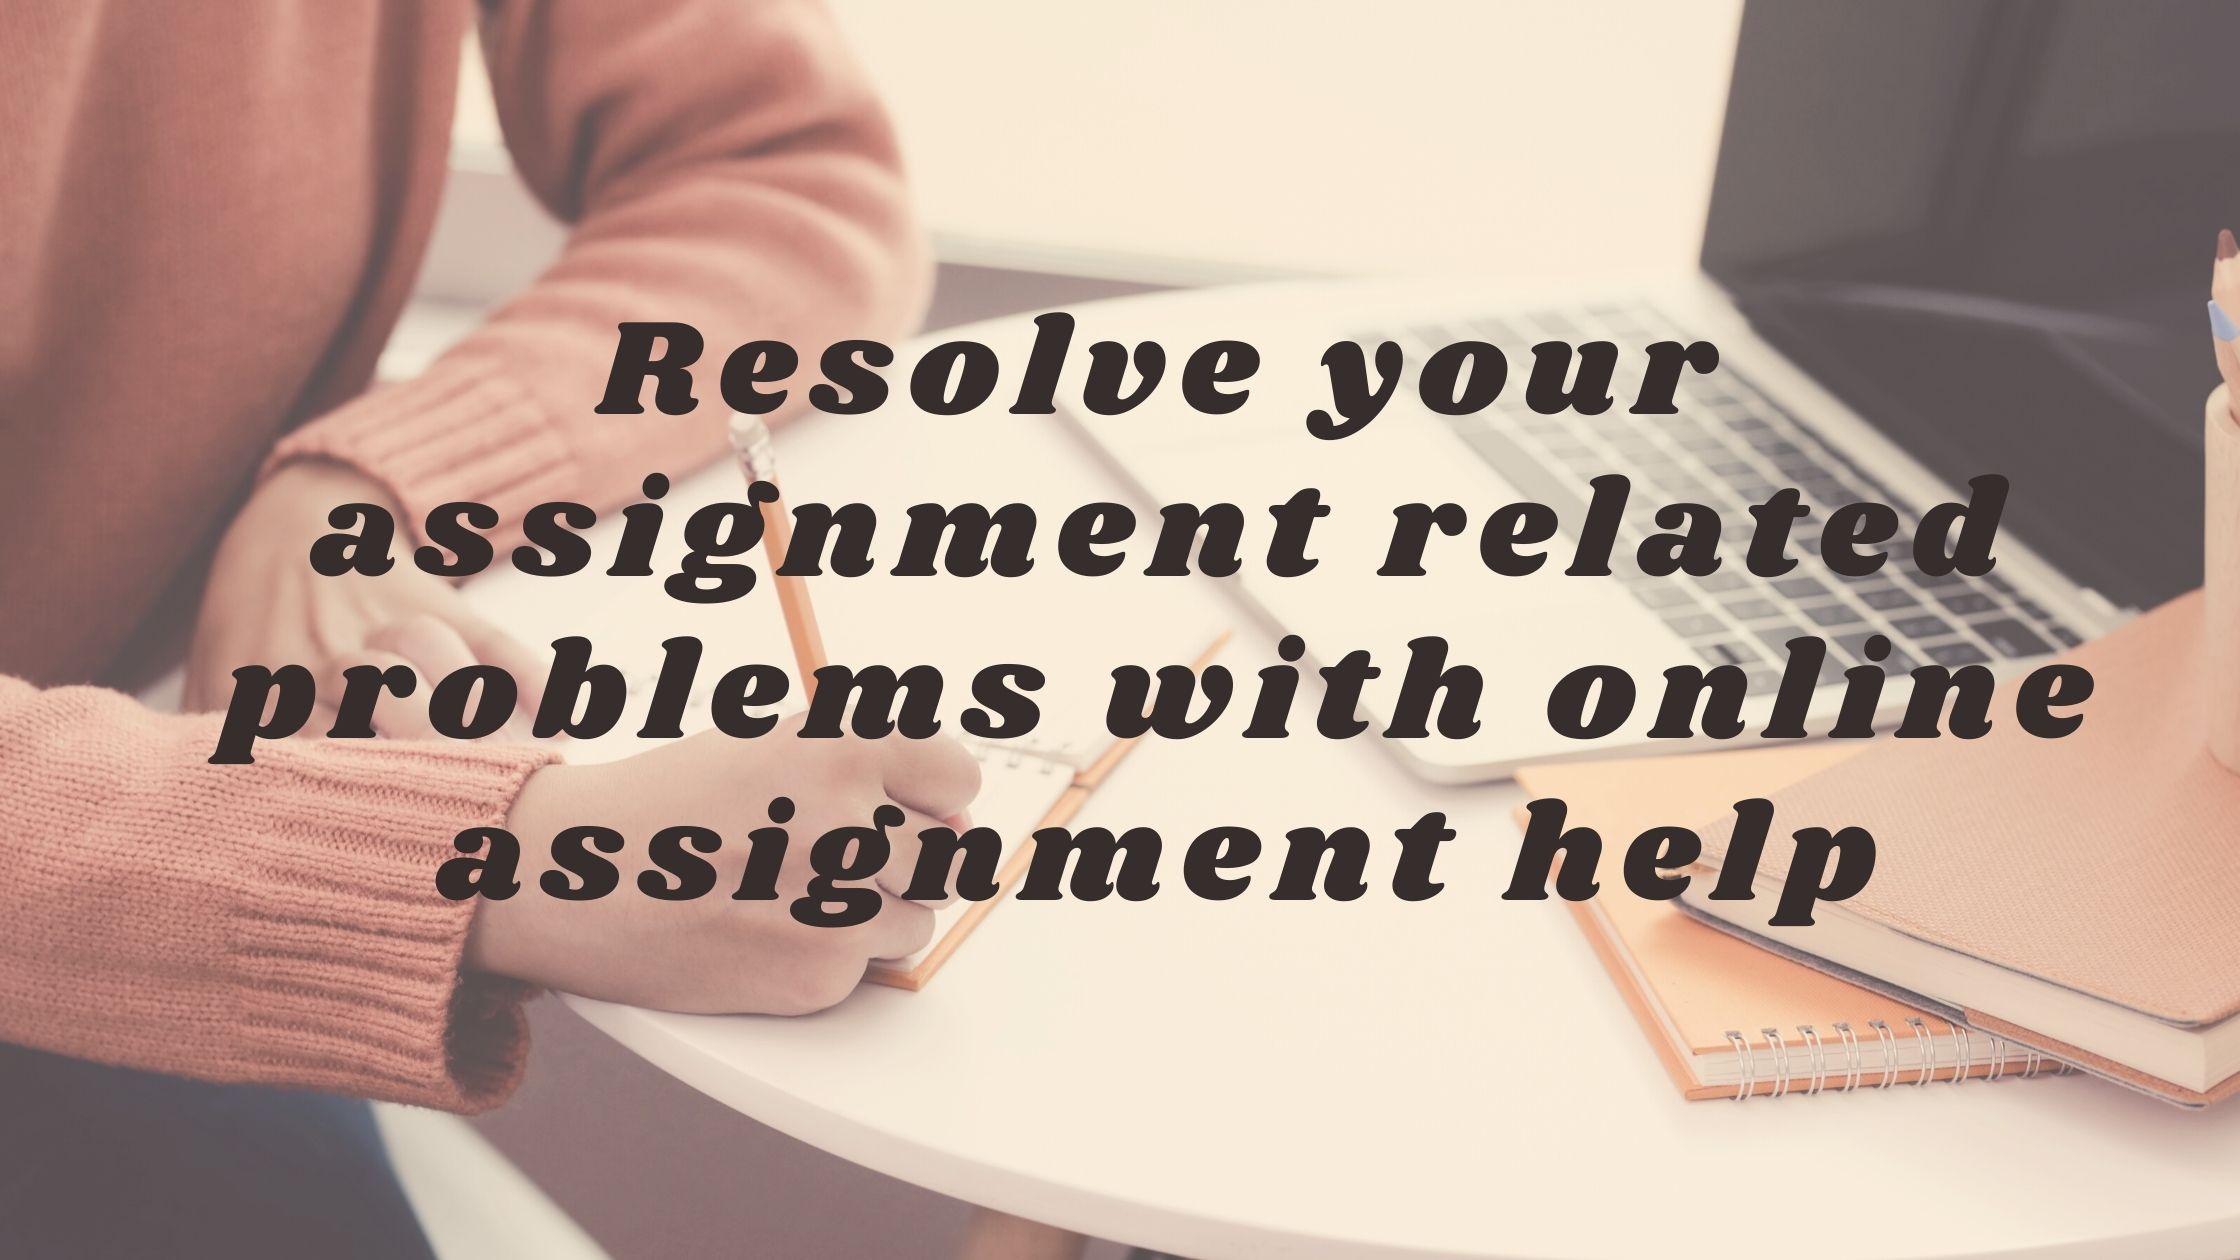 Resolve your assignment related problems with online assignment help